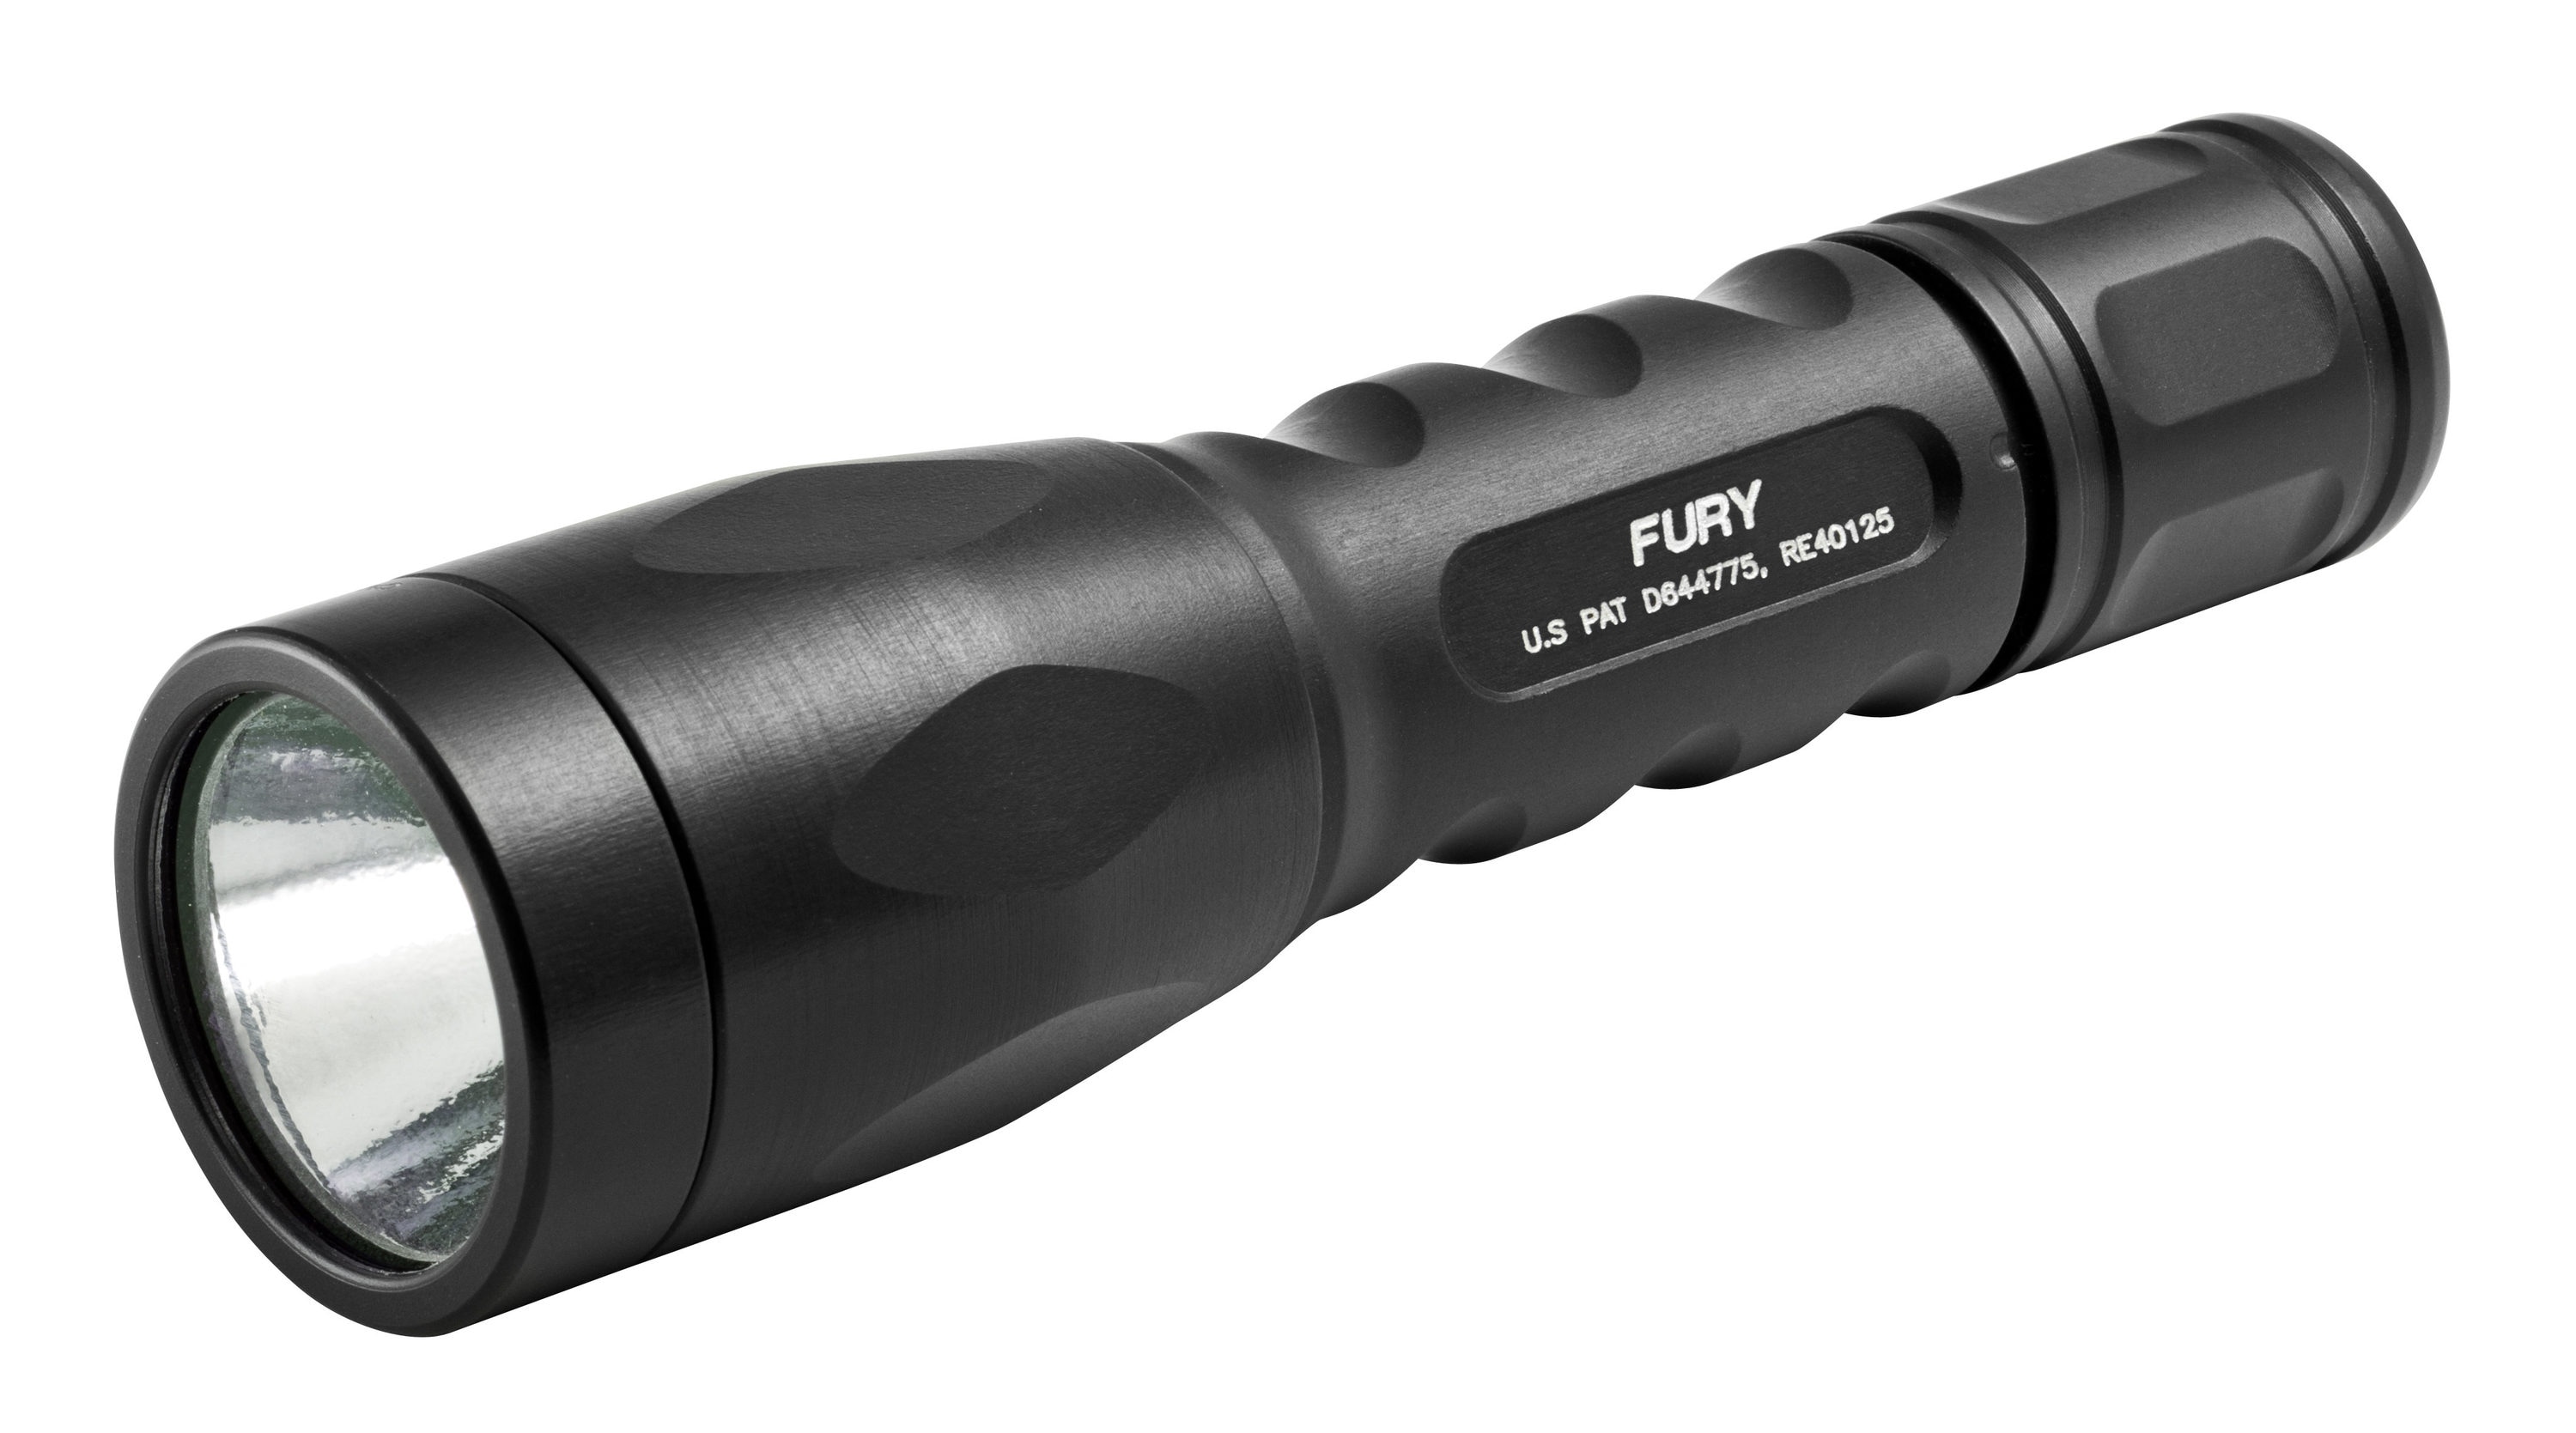 SureFire 500-Lumen LED Flashlight (123A Battery Included) at Lowes.com